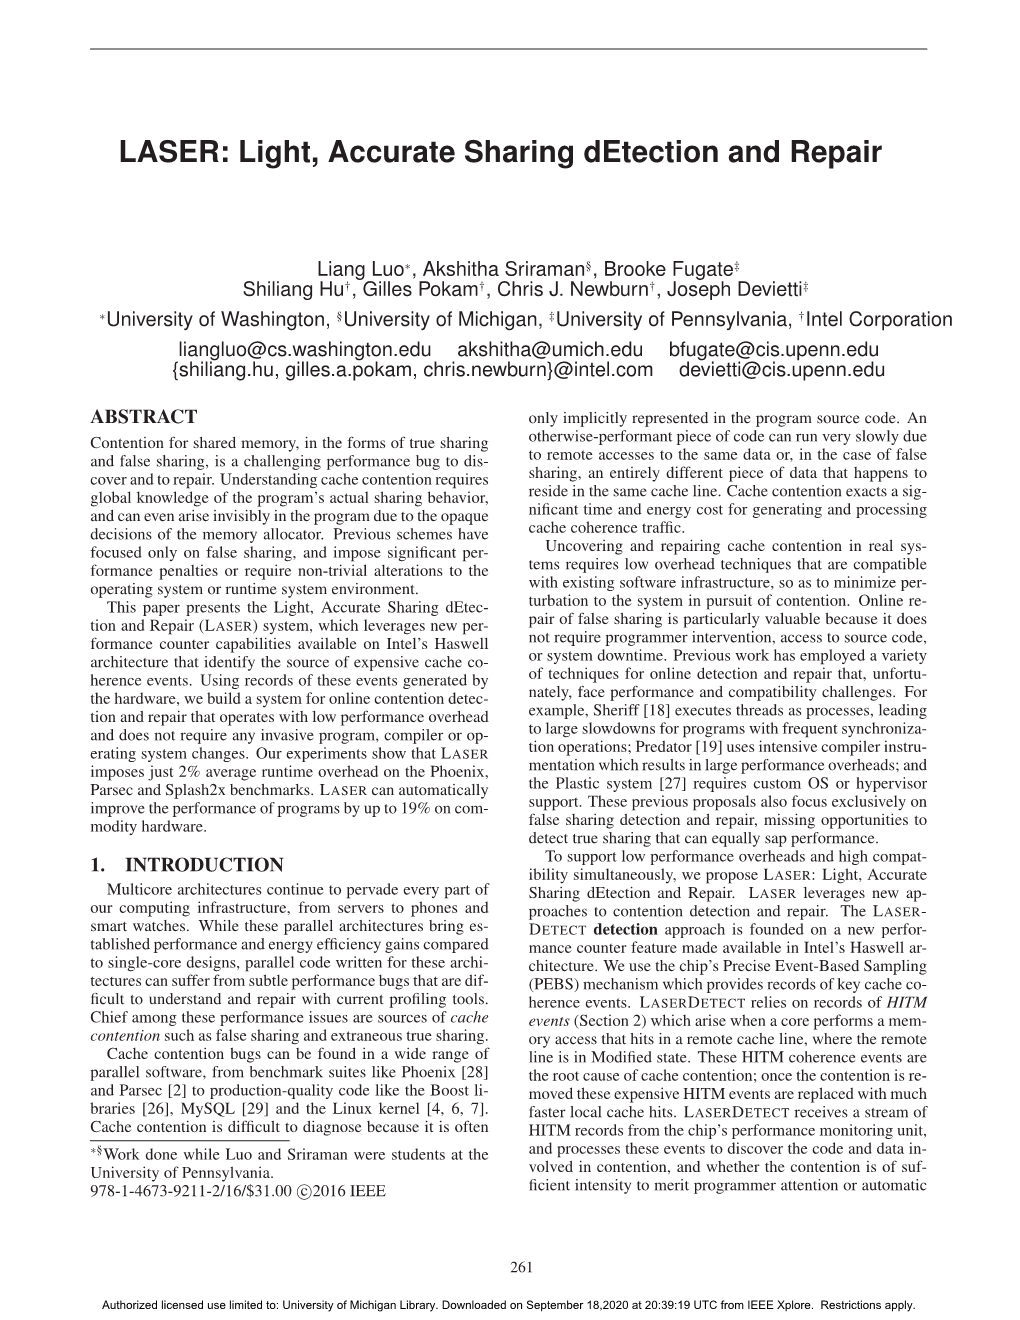 LASER: Light, Accurate Sharing Detection and Repair